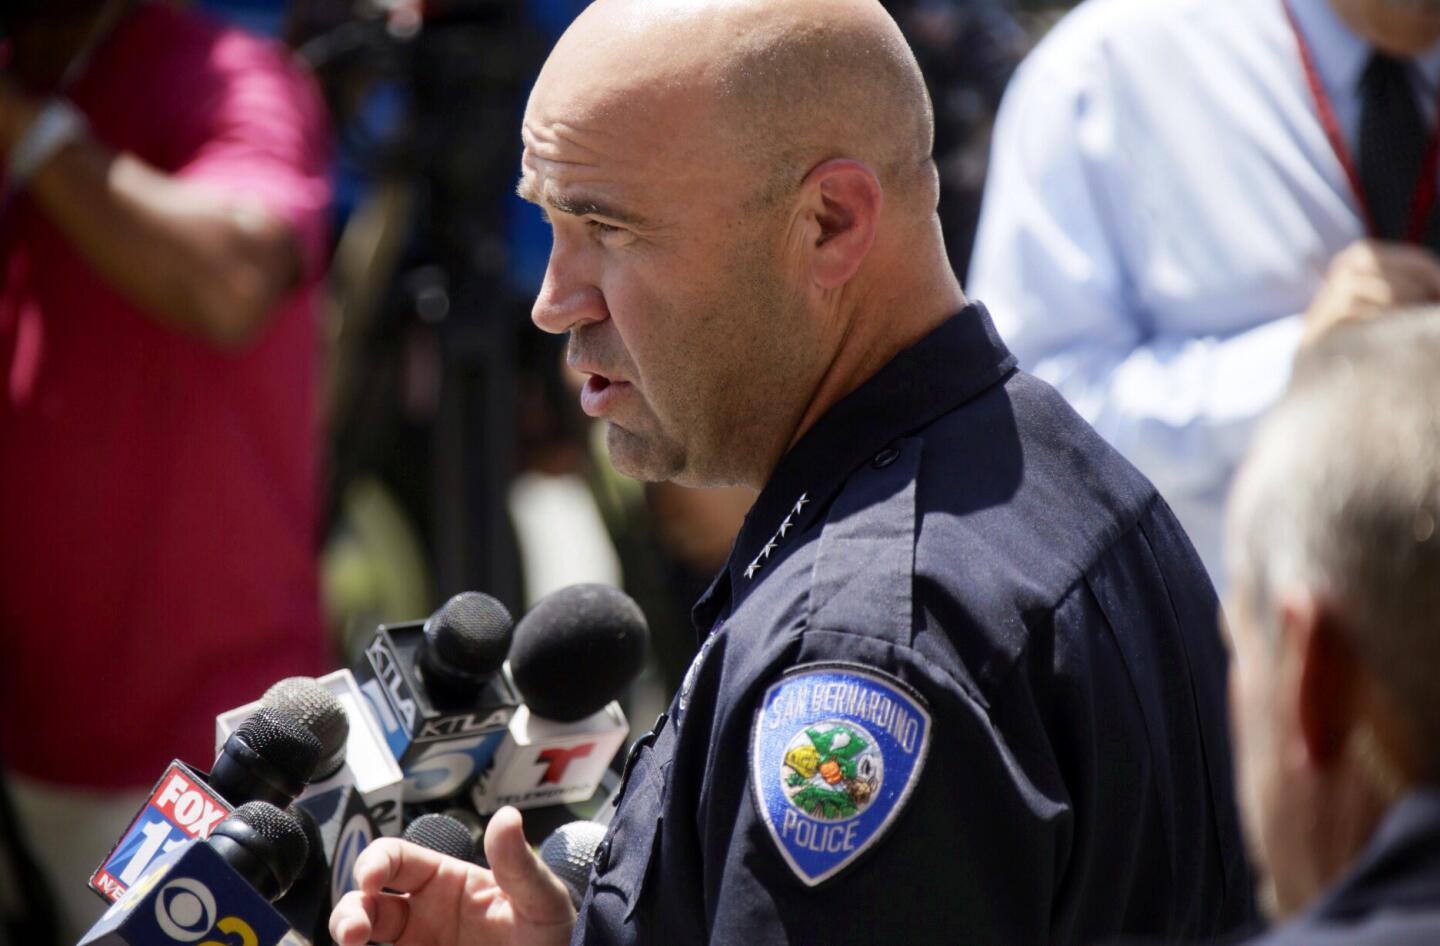 During a Friday afternoon news conference, San Bernardino Police Chief Jarrod Burguan discusses the gun battle between two police officers and a group of people.